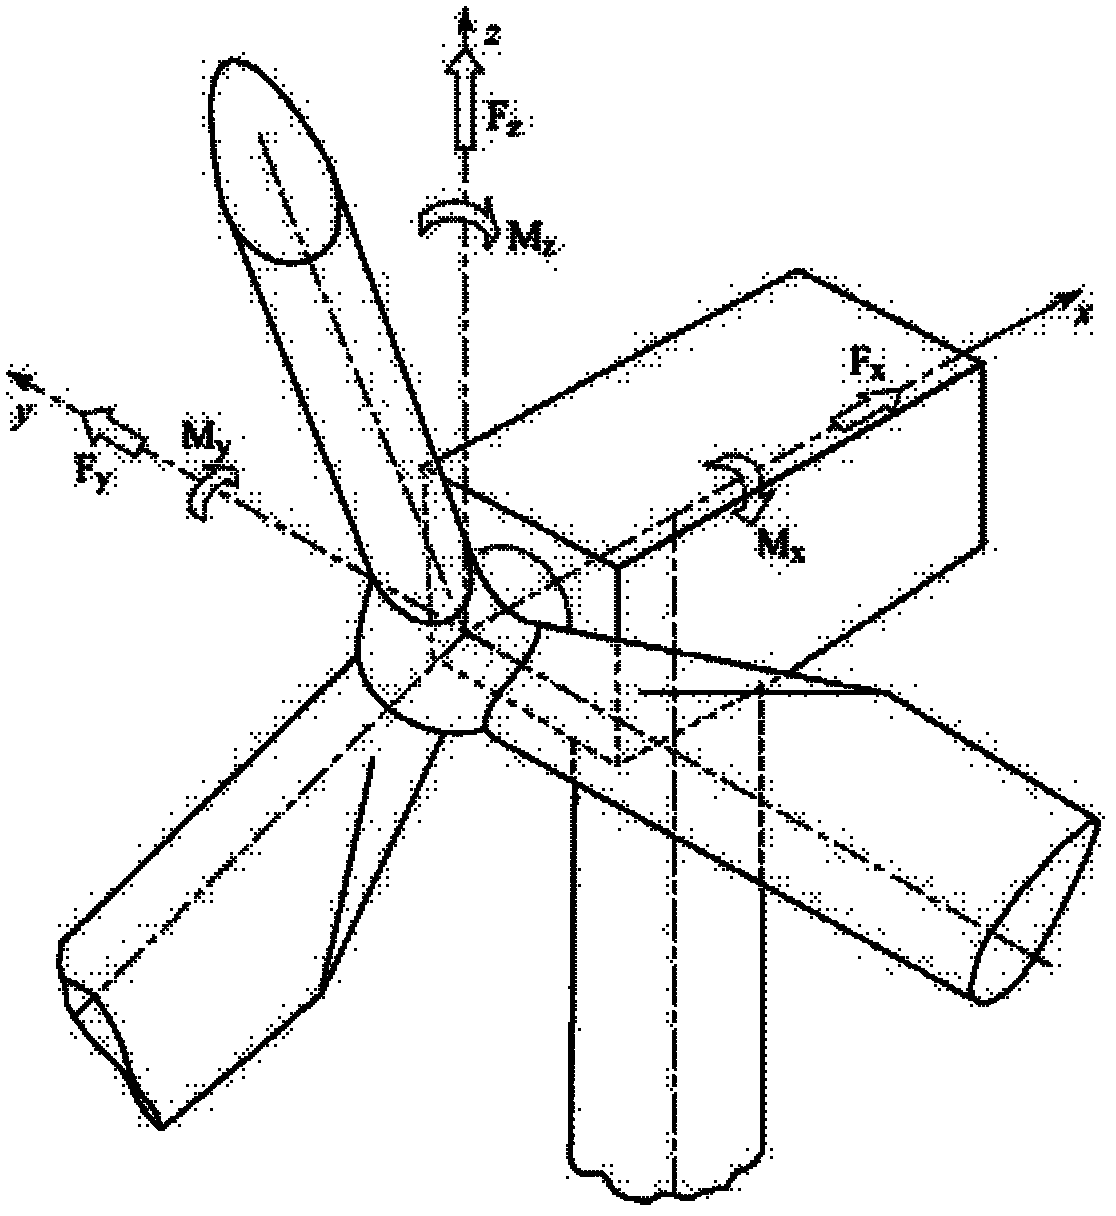 Multi-degree-of-freedom dynamic loading device for simulating wind power and ocean current load